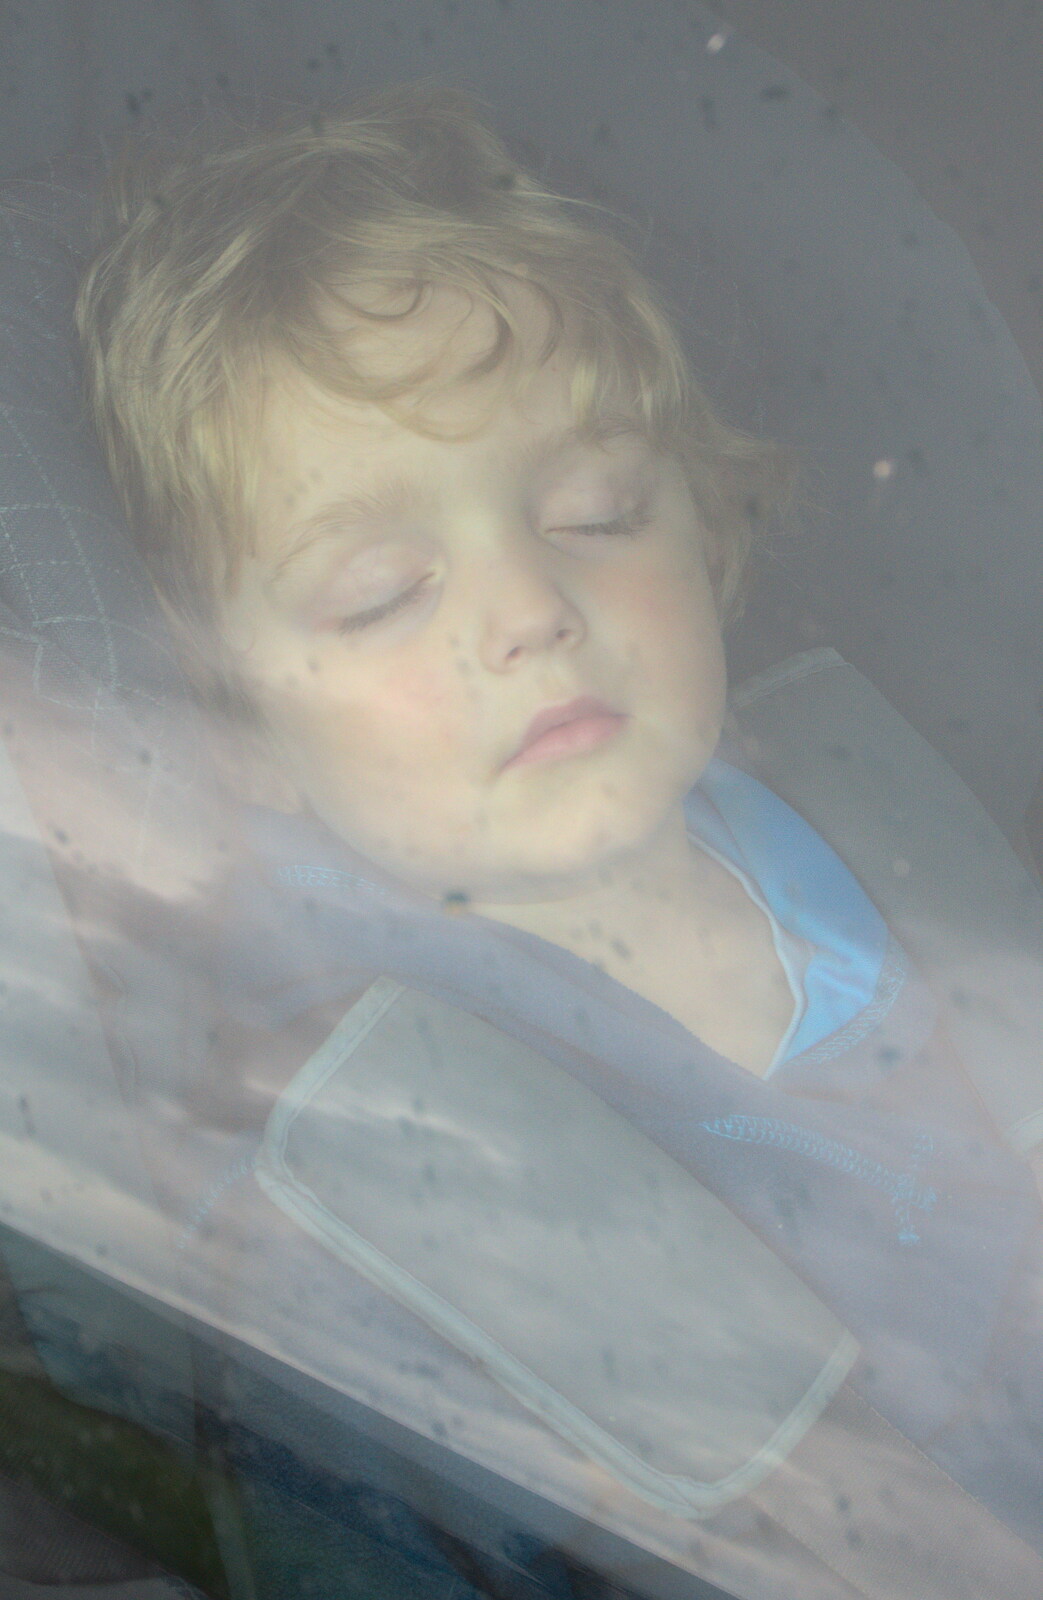 Fred has a doze in the back of the car from A Visit to the Aquarium, The Barbican and Dartmoor, Plymouth, Devon - 10th June 2012